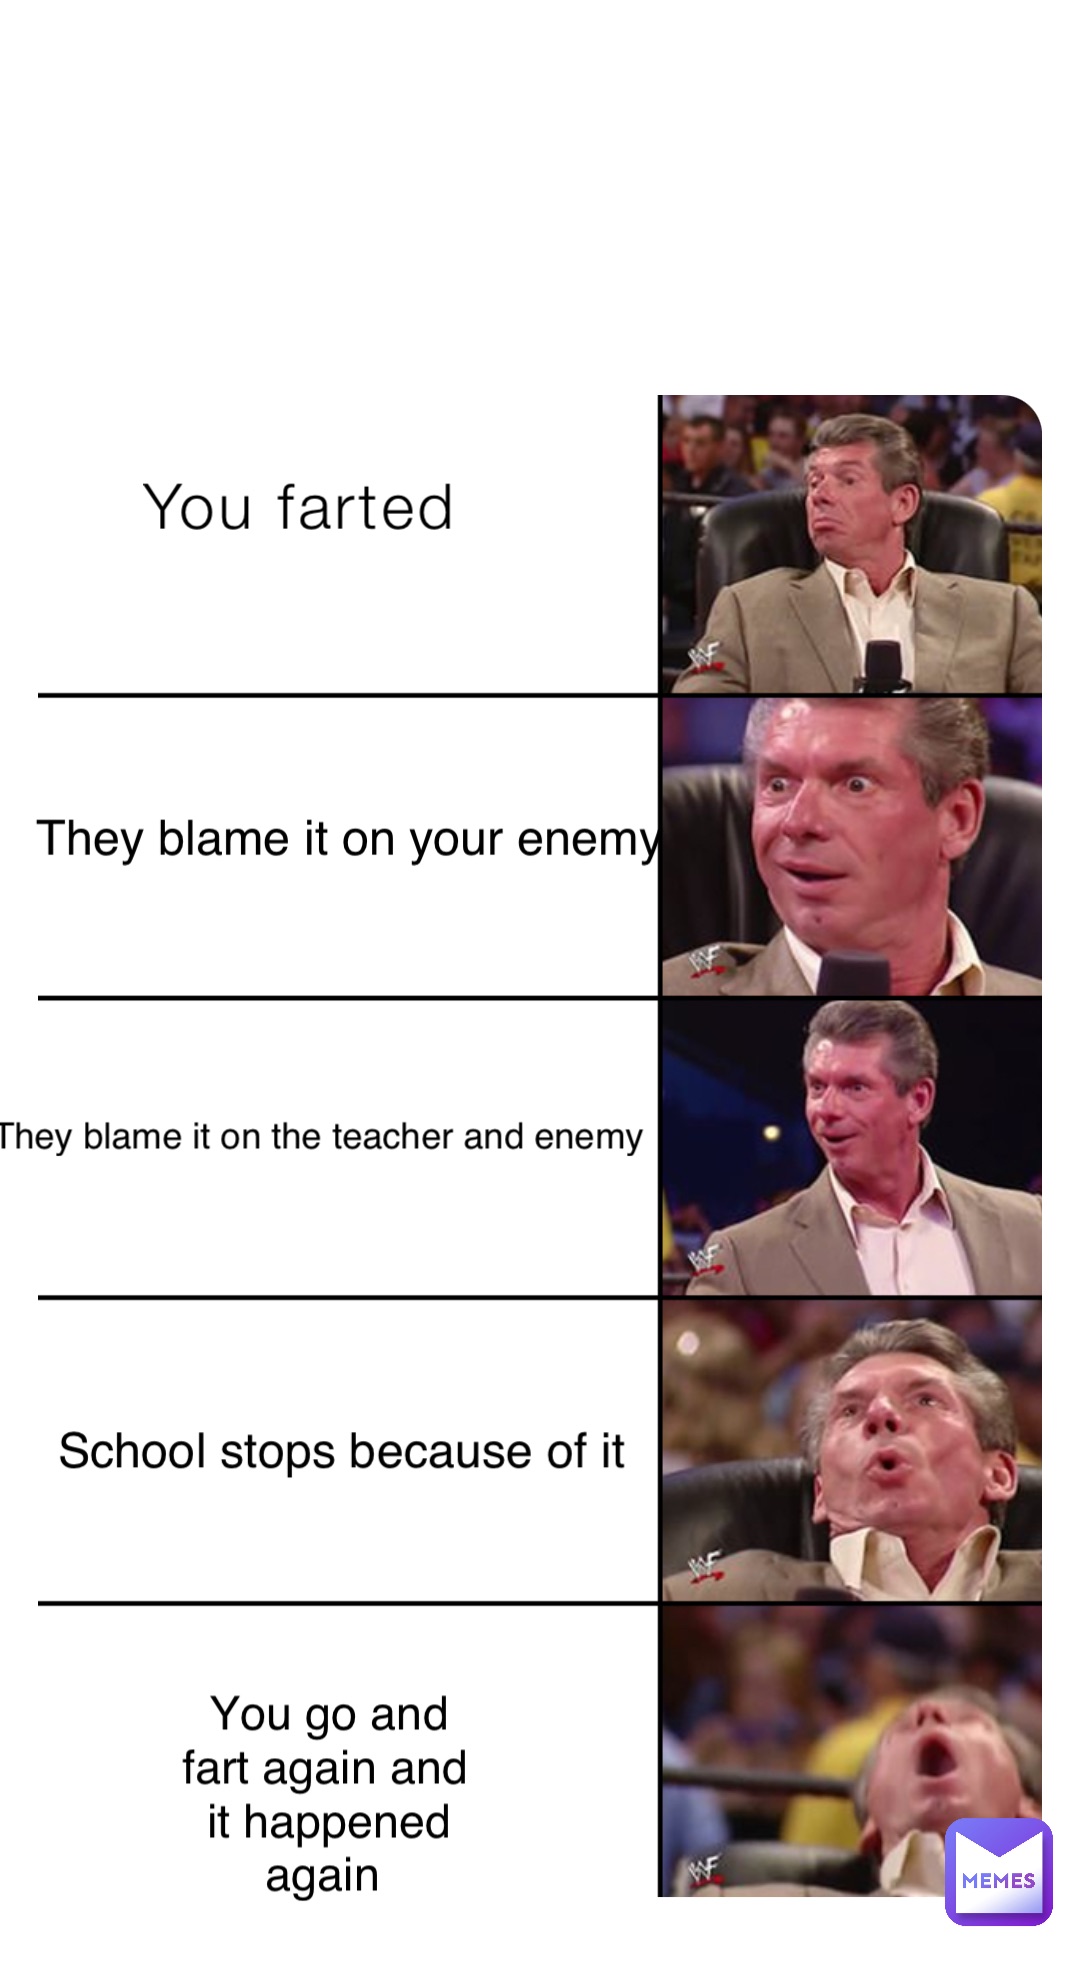 You farted They blame it on your enemy They blame it on the teacher and enemy School stops because of it You go and fart again and it happened again